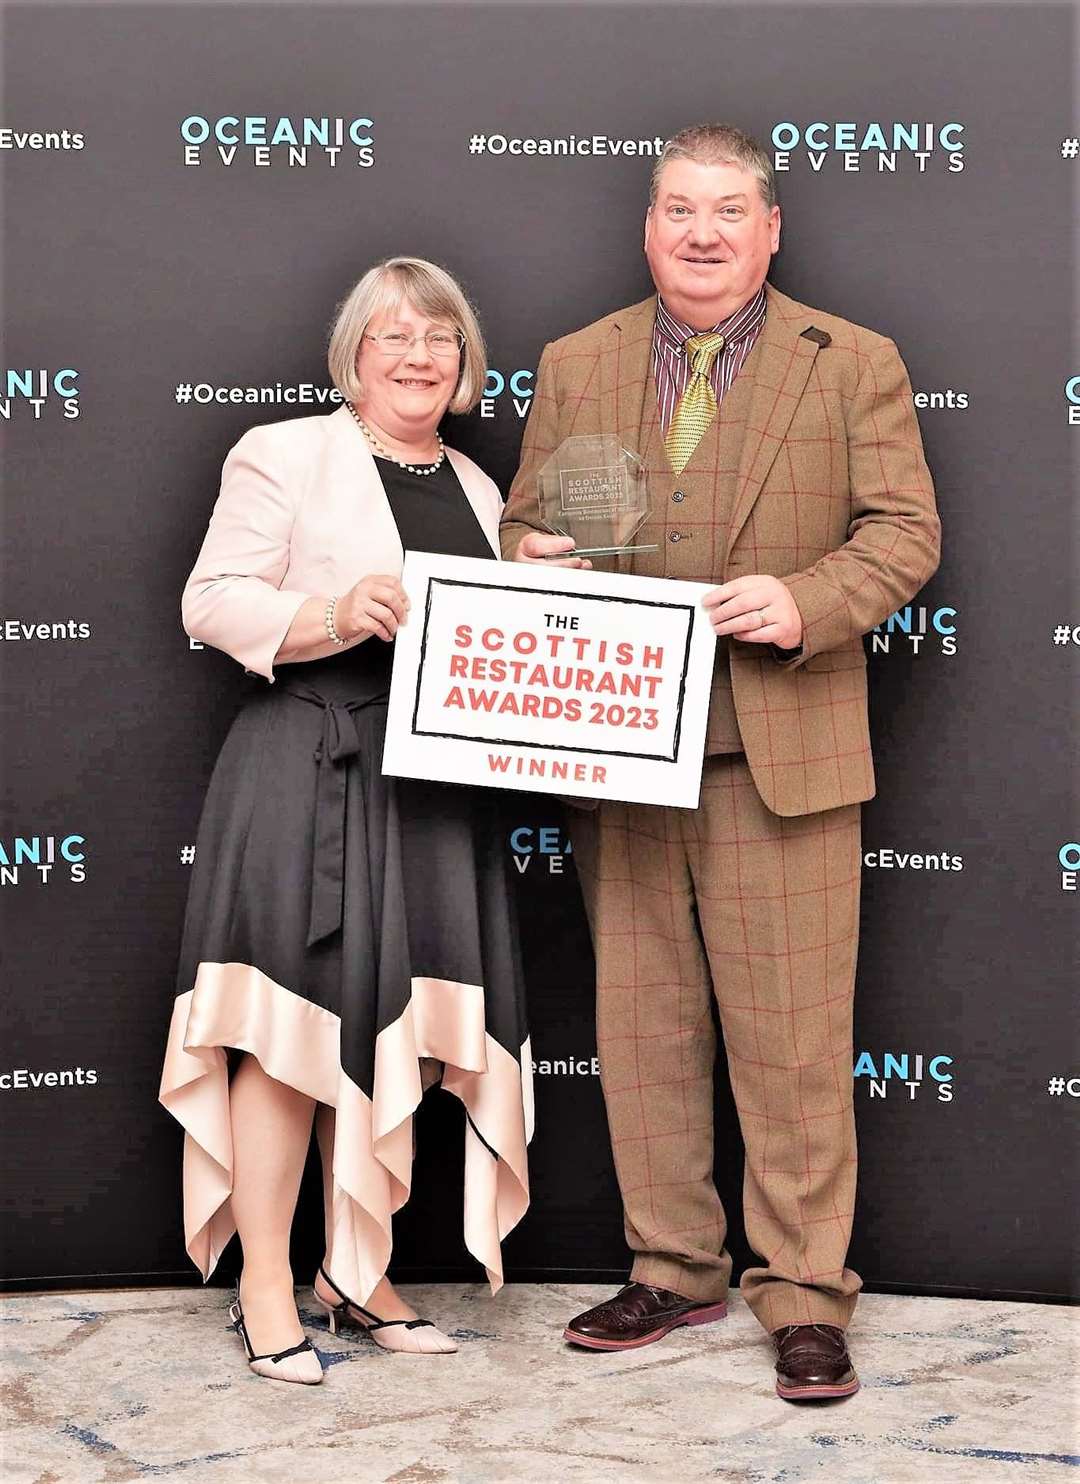 Bydand restaurant in Thurso won the award for European Restaurant of the Year. Brian Gordon is pictured with his wife Angela at the prestigious event in Glasgow.